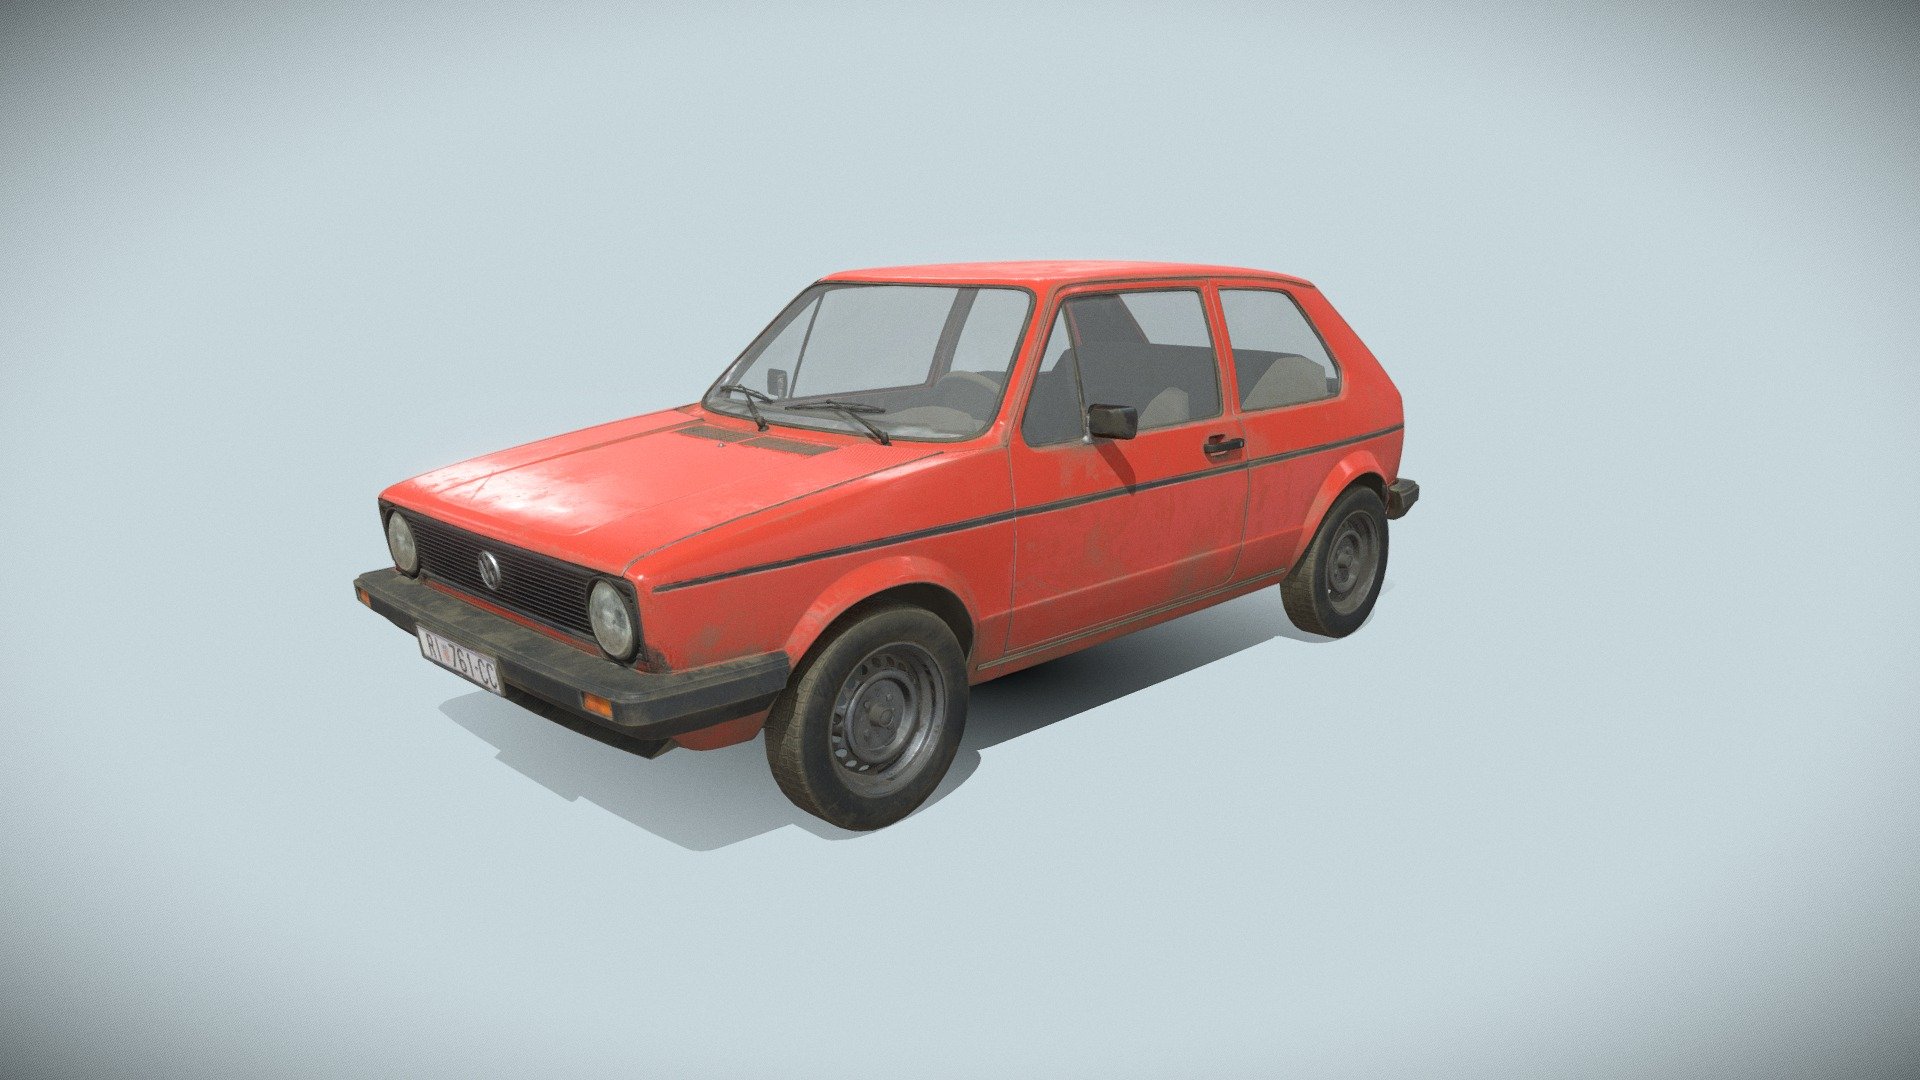 Hi guys! This is my Volkswagen Golf I low poly model with baked textures and optimised topology. Clear UV maps, one texture pack for entire model. Made with Blender, materials with Substance Painter.

For any questions, feel free to contact me 3d model